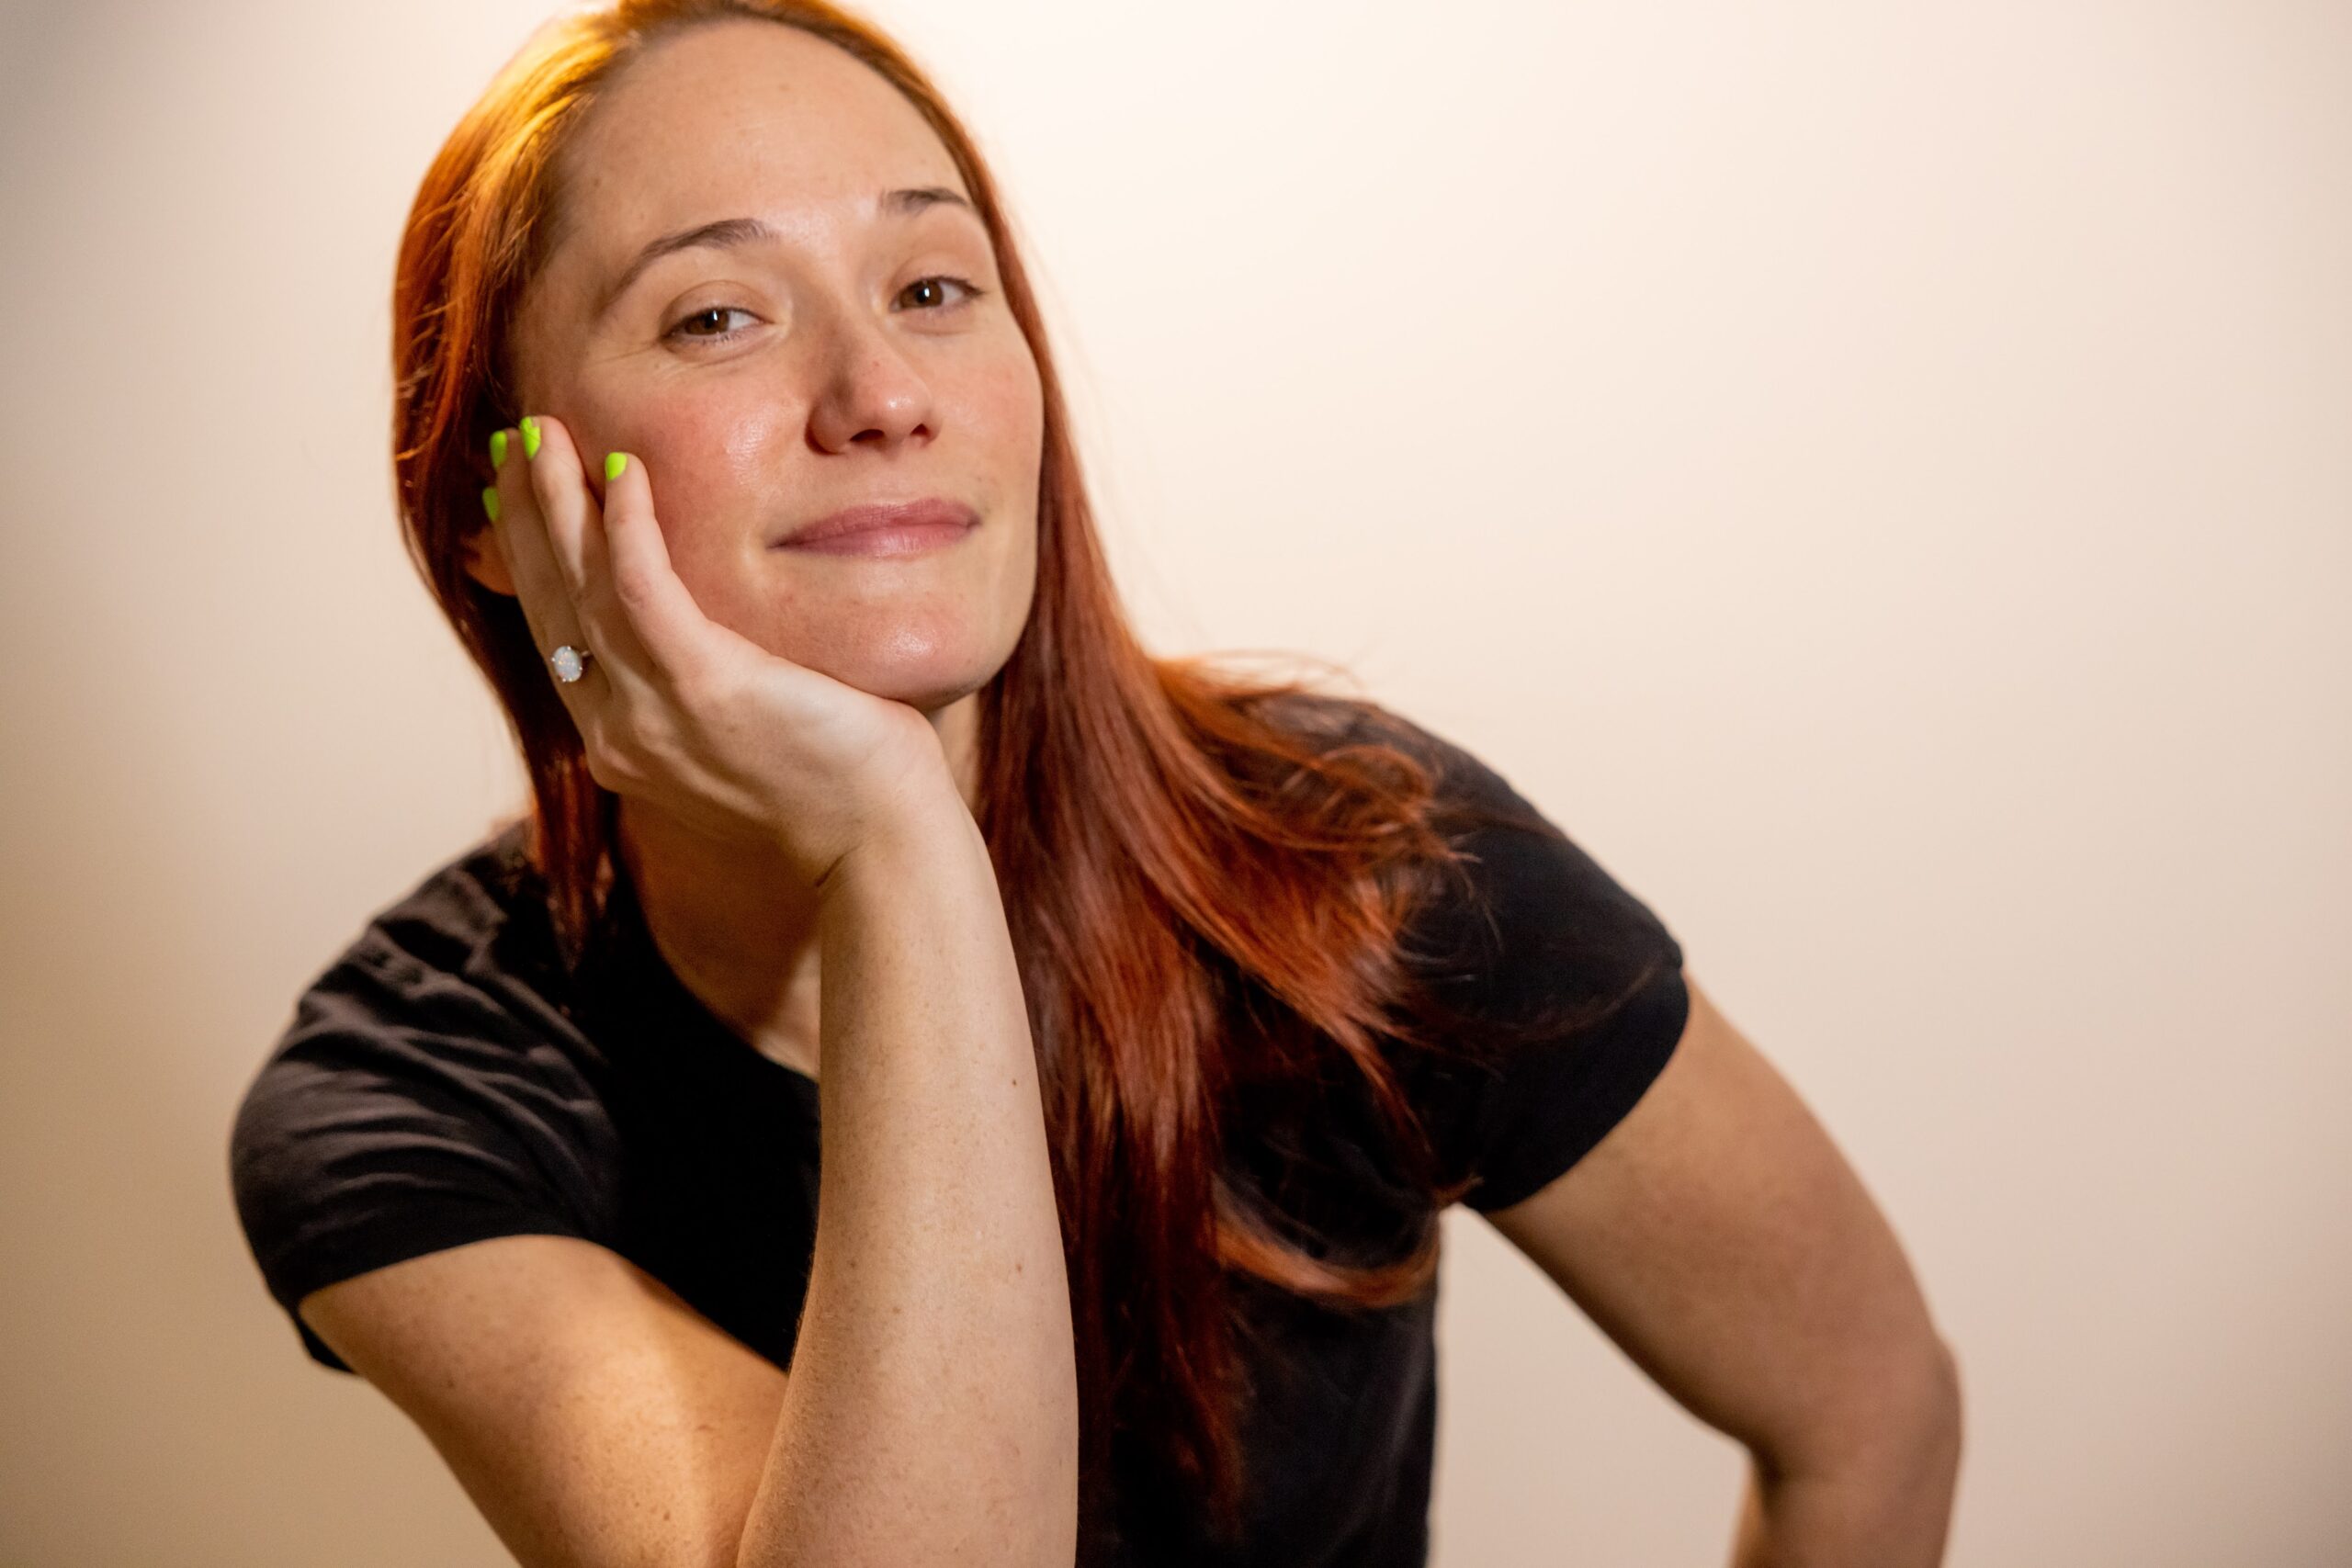 Sarah Brown, woman with long red hair, wearing a black tee-shirt, with head propped on chin smiling slightly at the camera